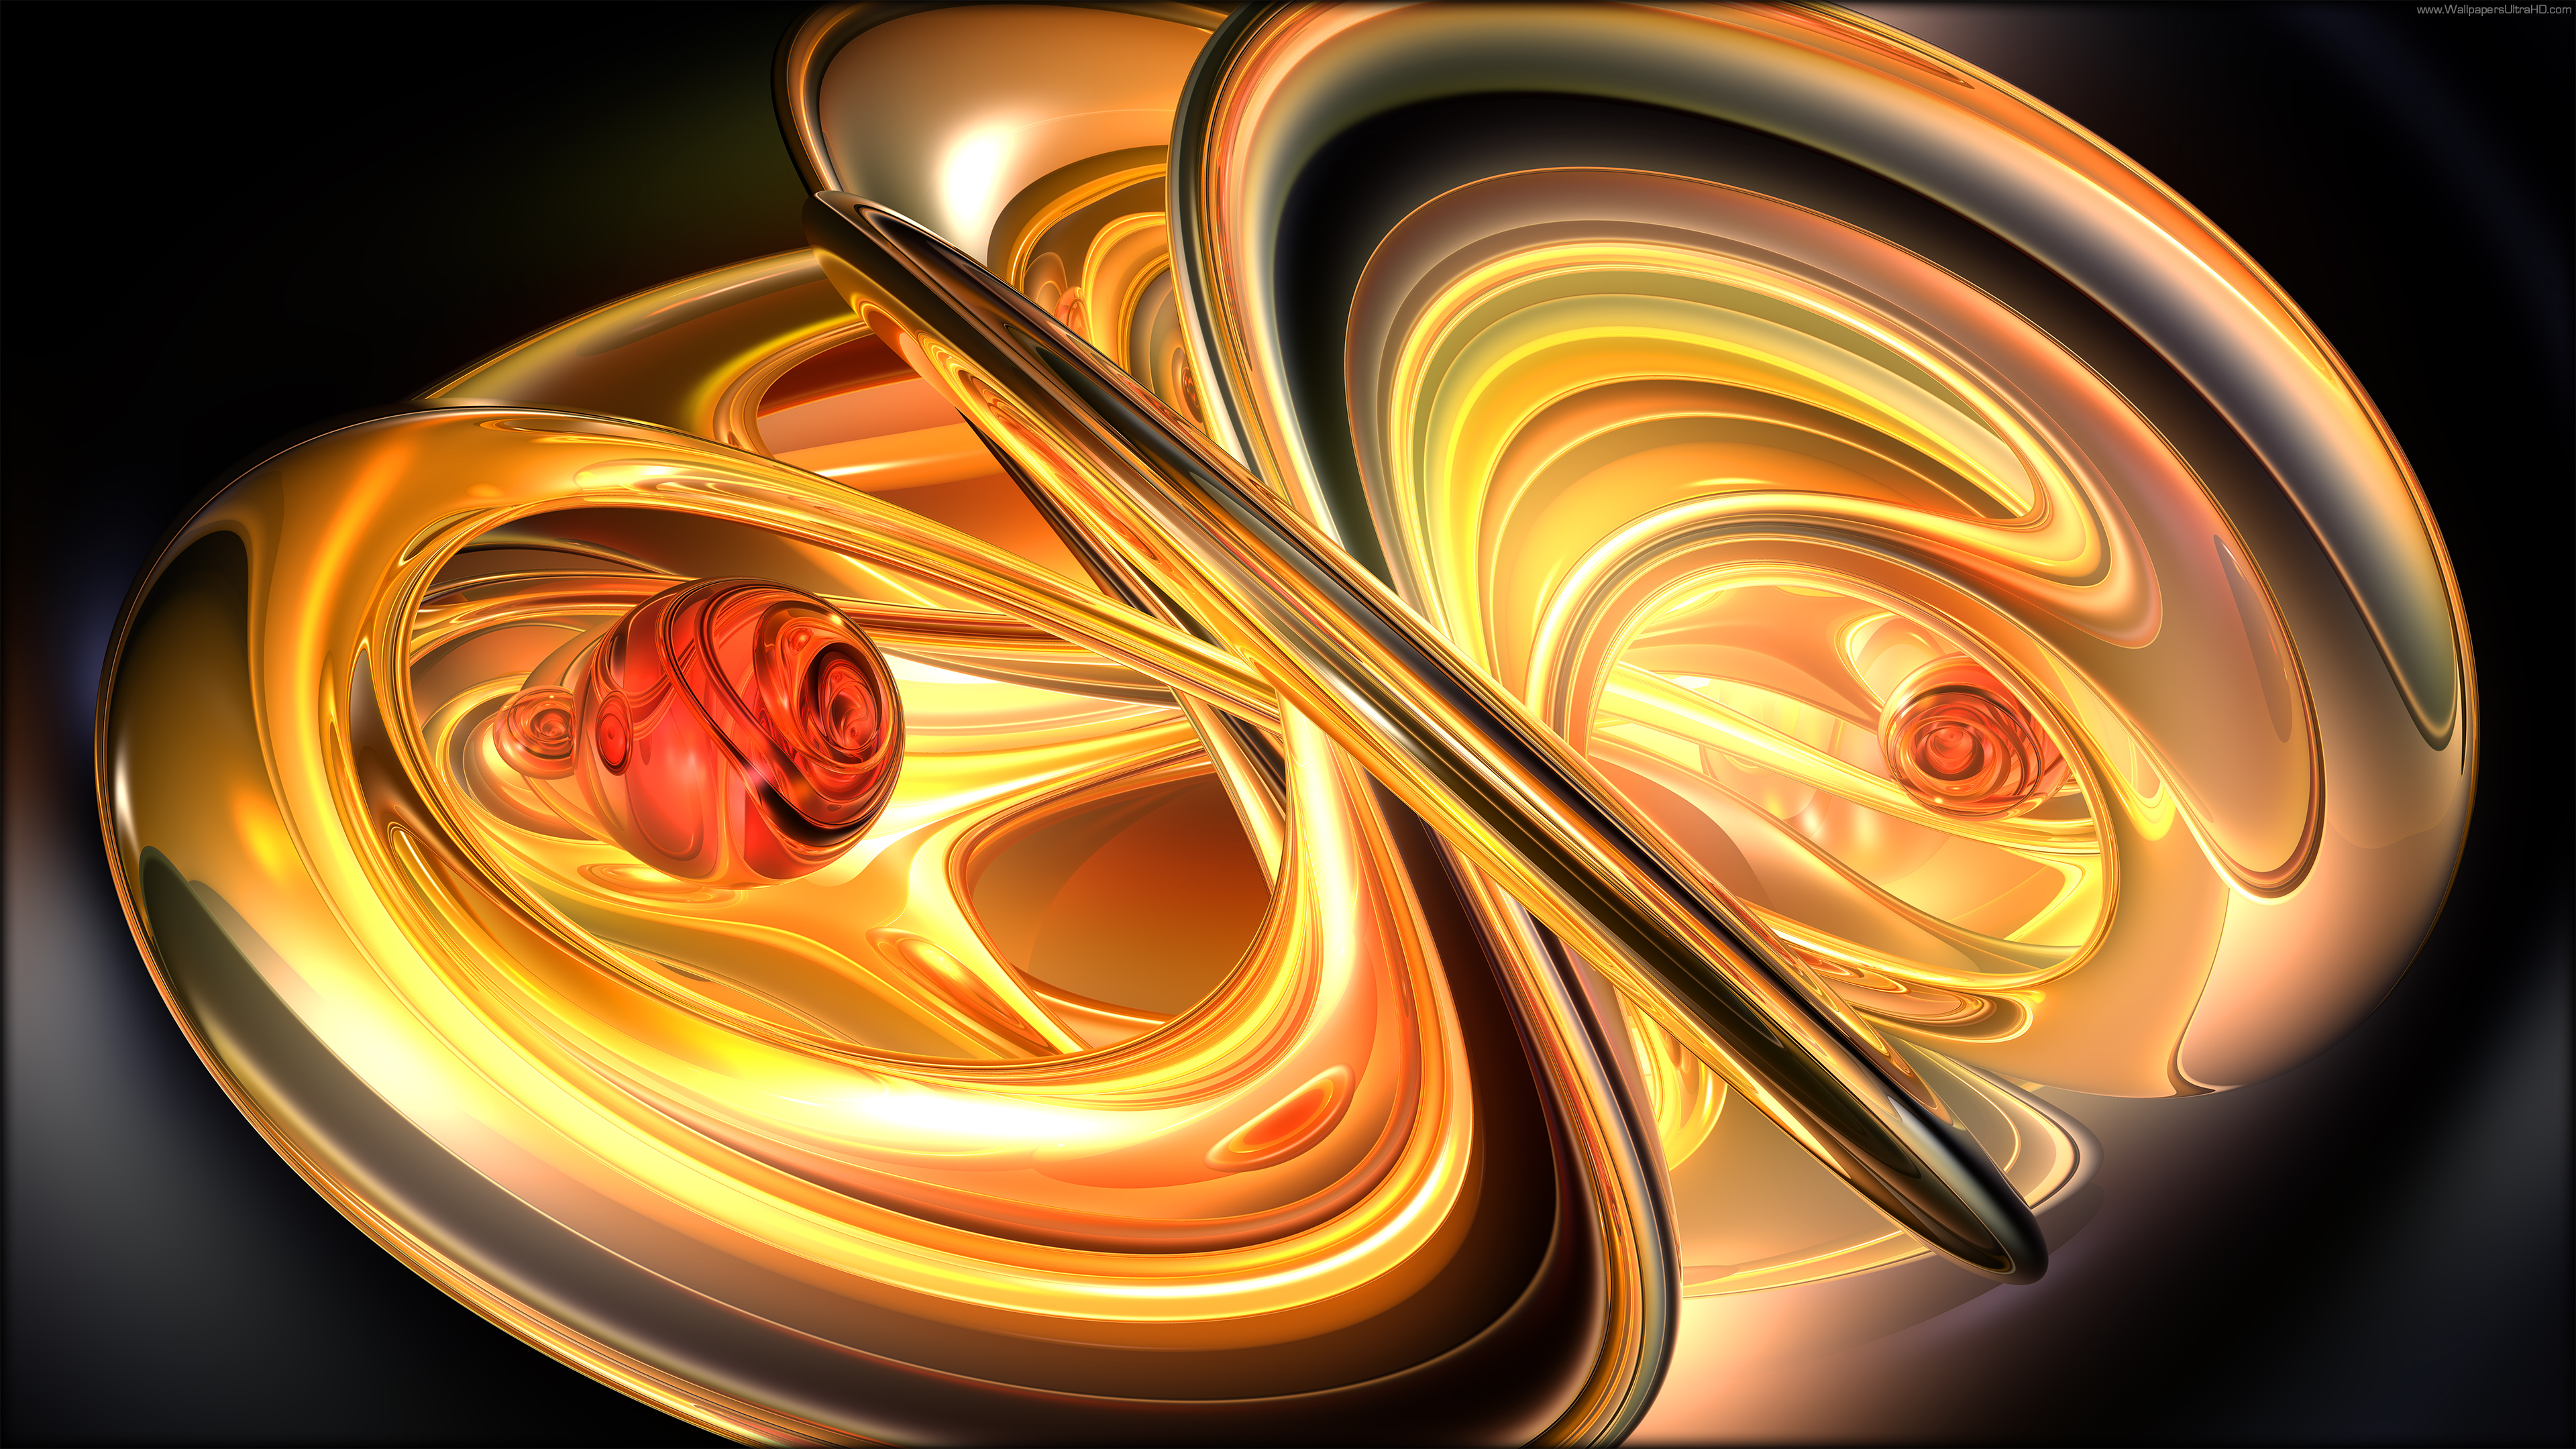 Ultra hd wallpapers 4k 3d red abstraction red ball with gold rings 3840x2160